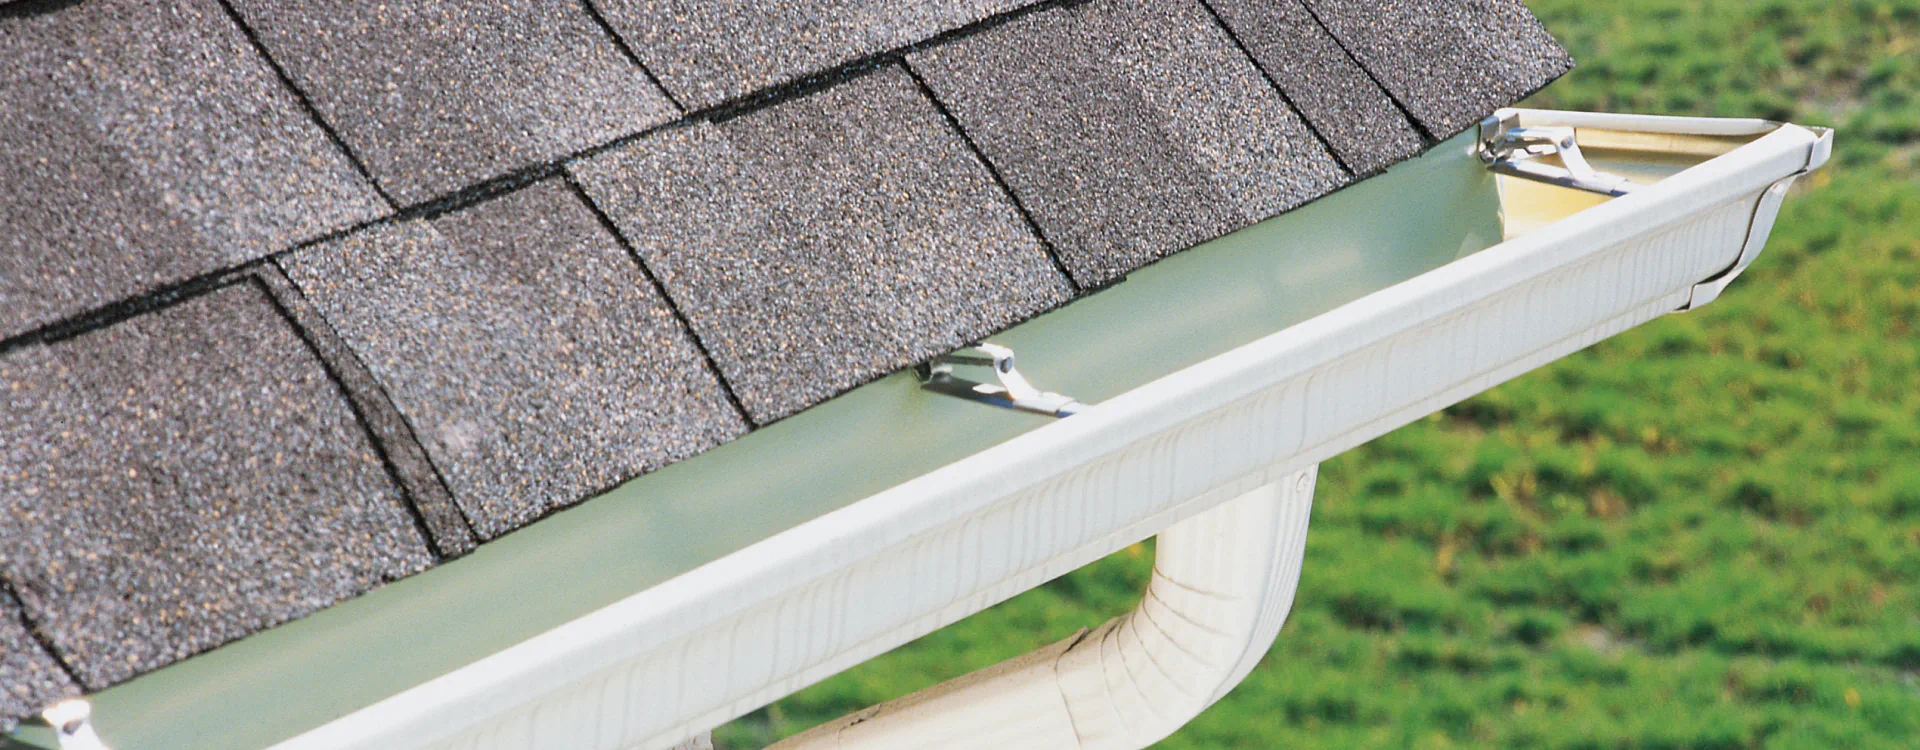 roof asphalt shingle with clean white metal roof gutter clive ia